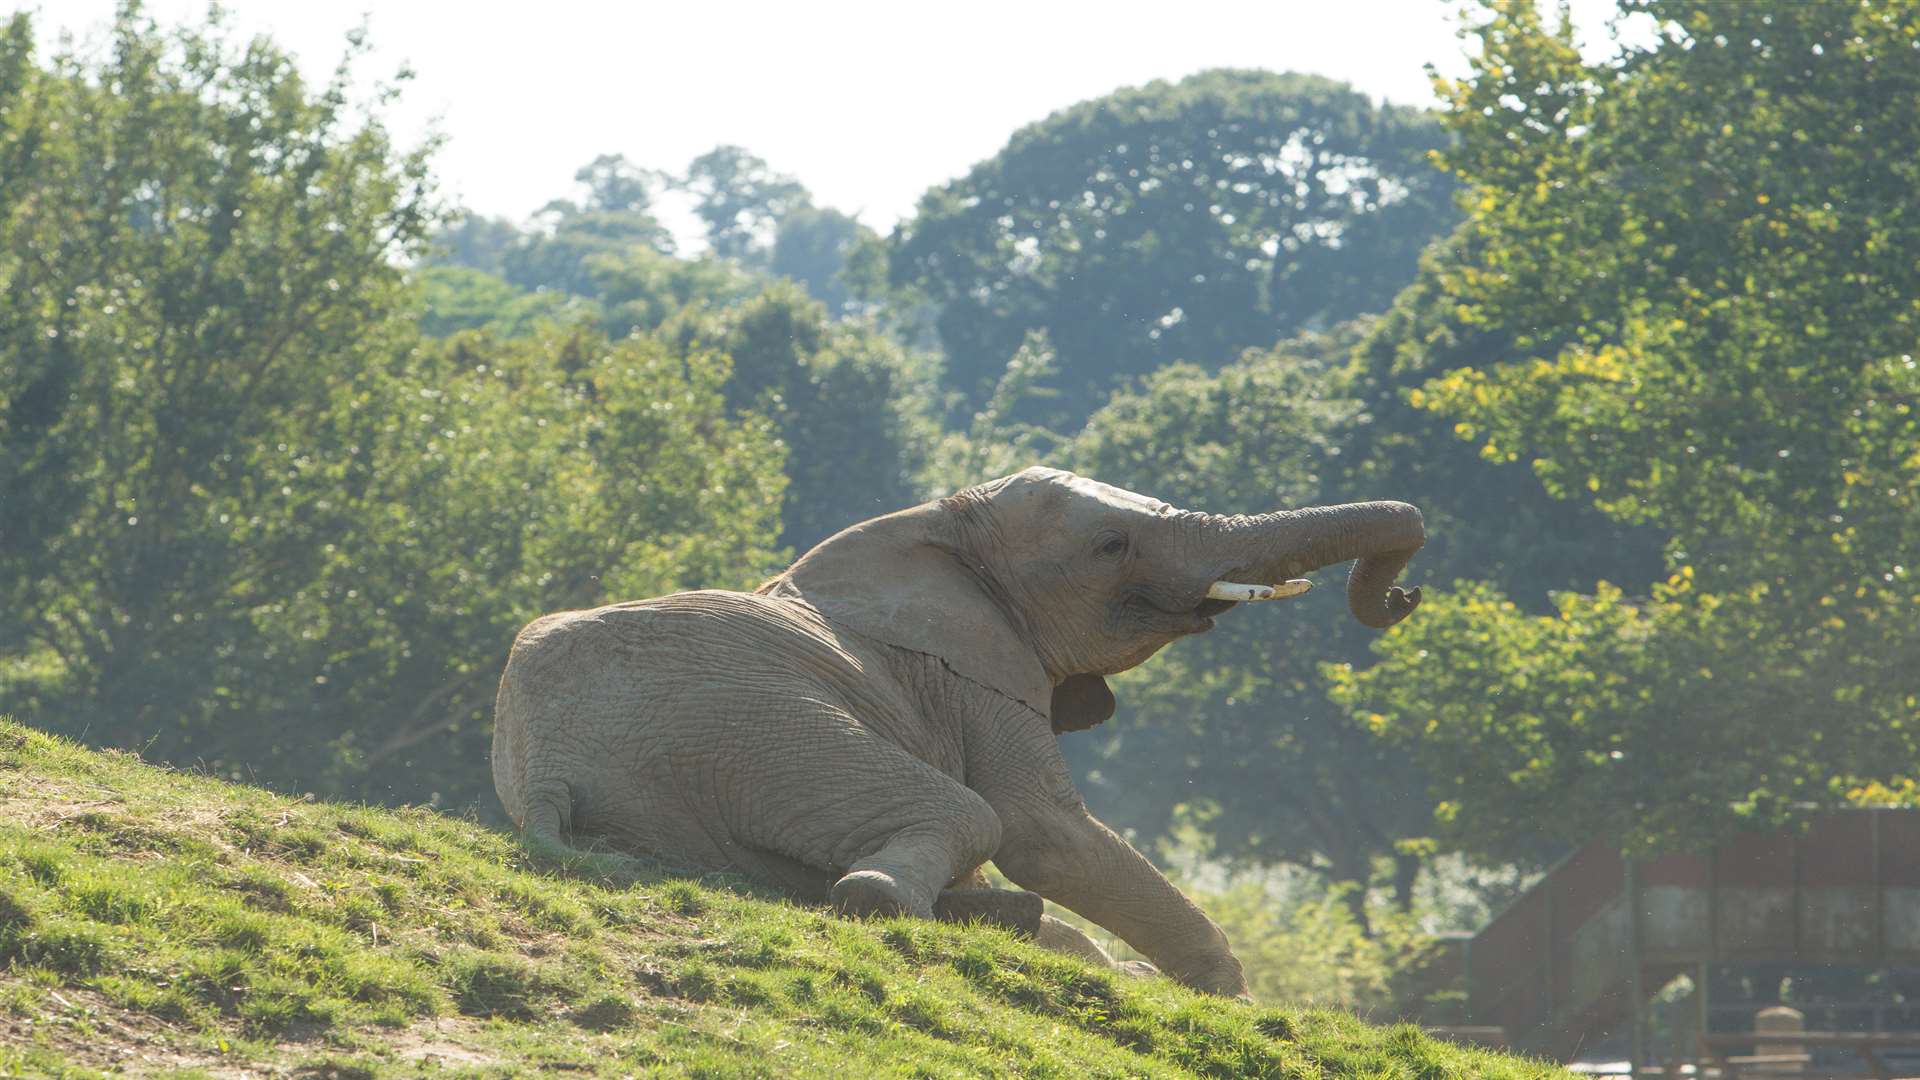 Head to Howletts this bank holiday weekend for your last summer holiday hurrah